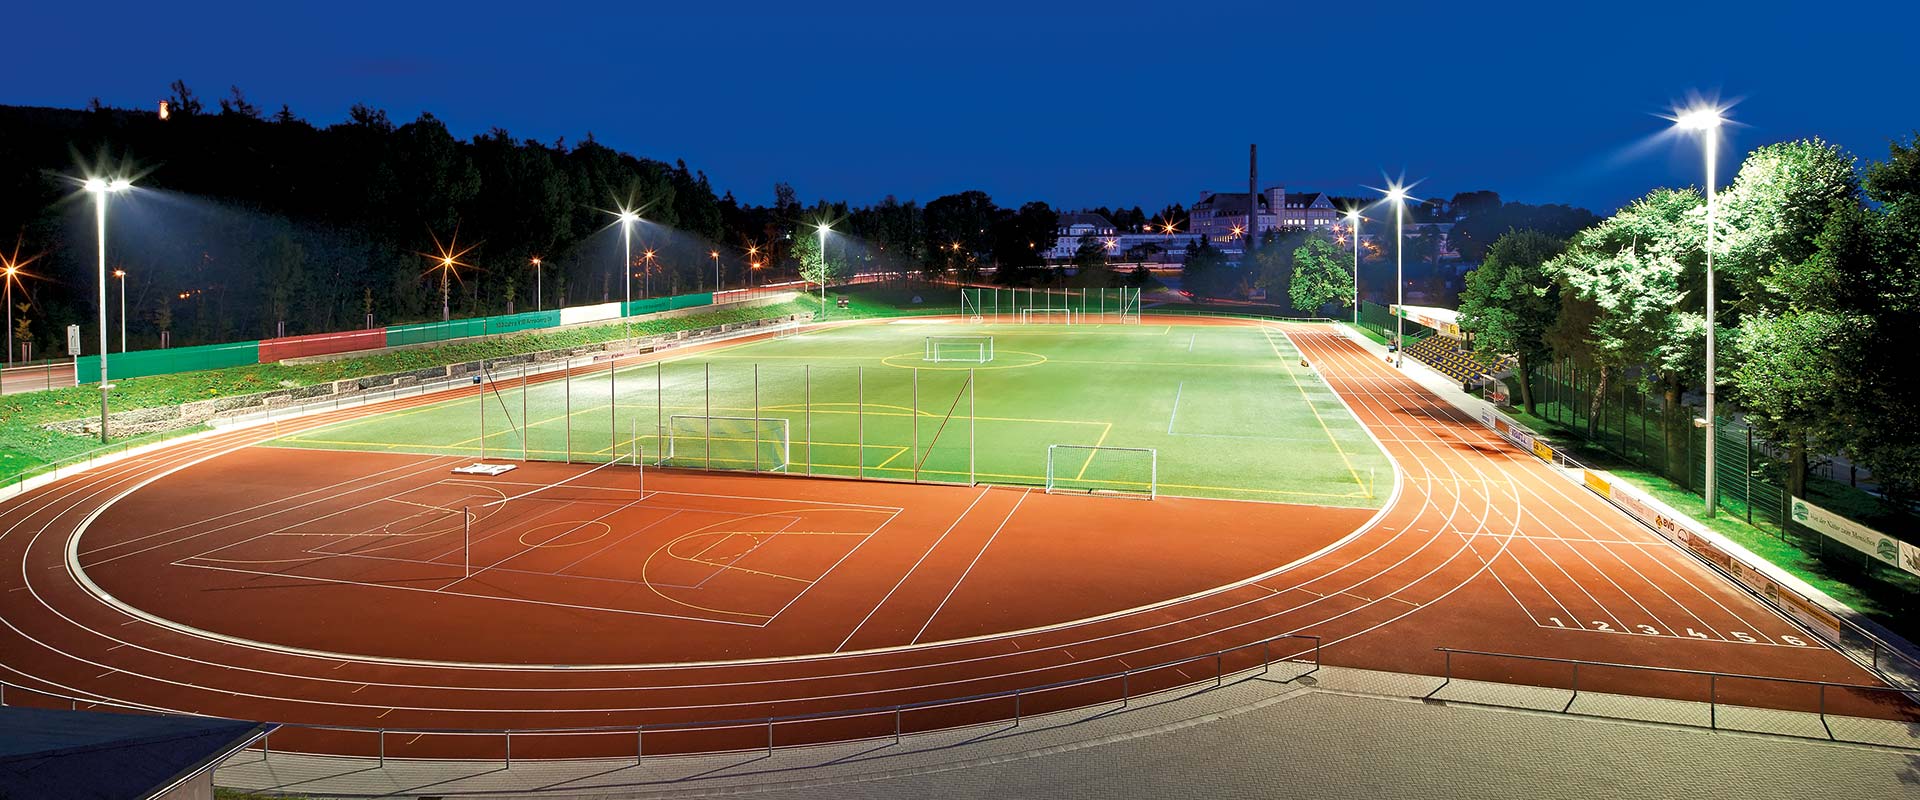 Outdoor sports lights